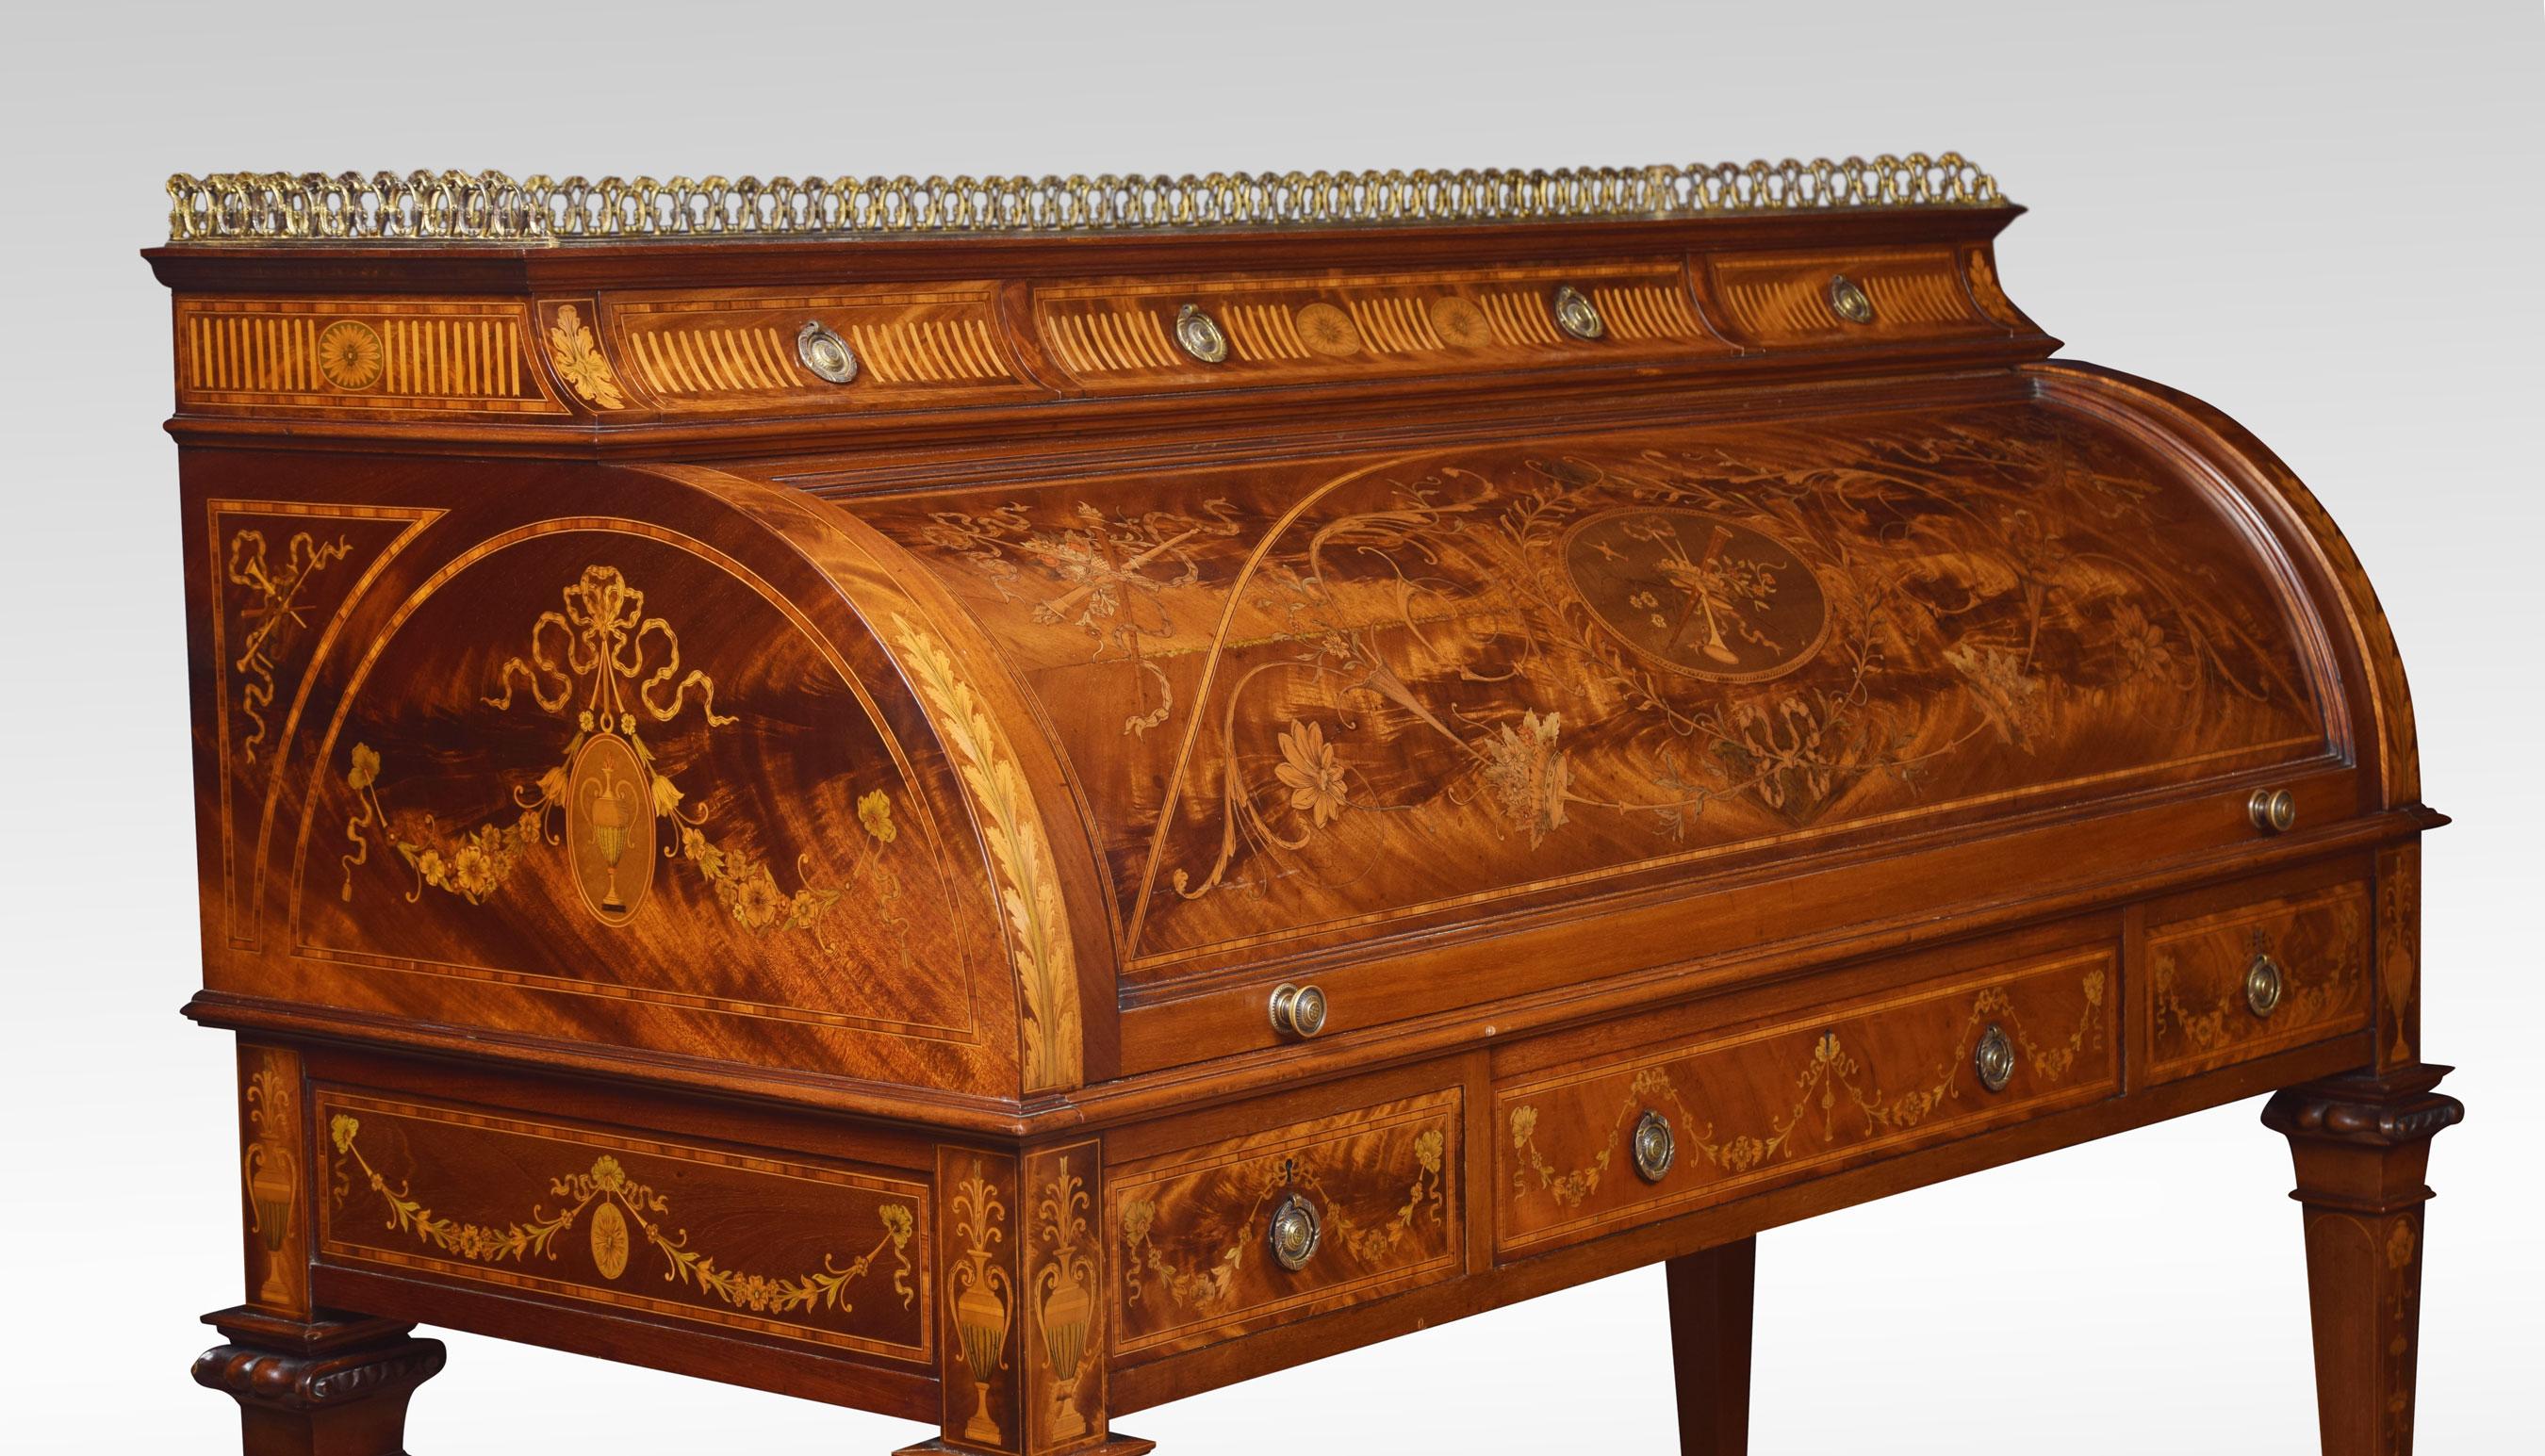 Substantial Sheraton Revival Marquetry Inlaid Cylinder Bureau 5